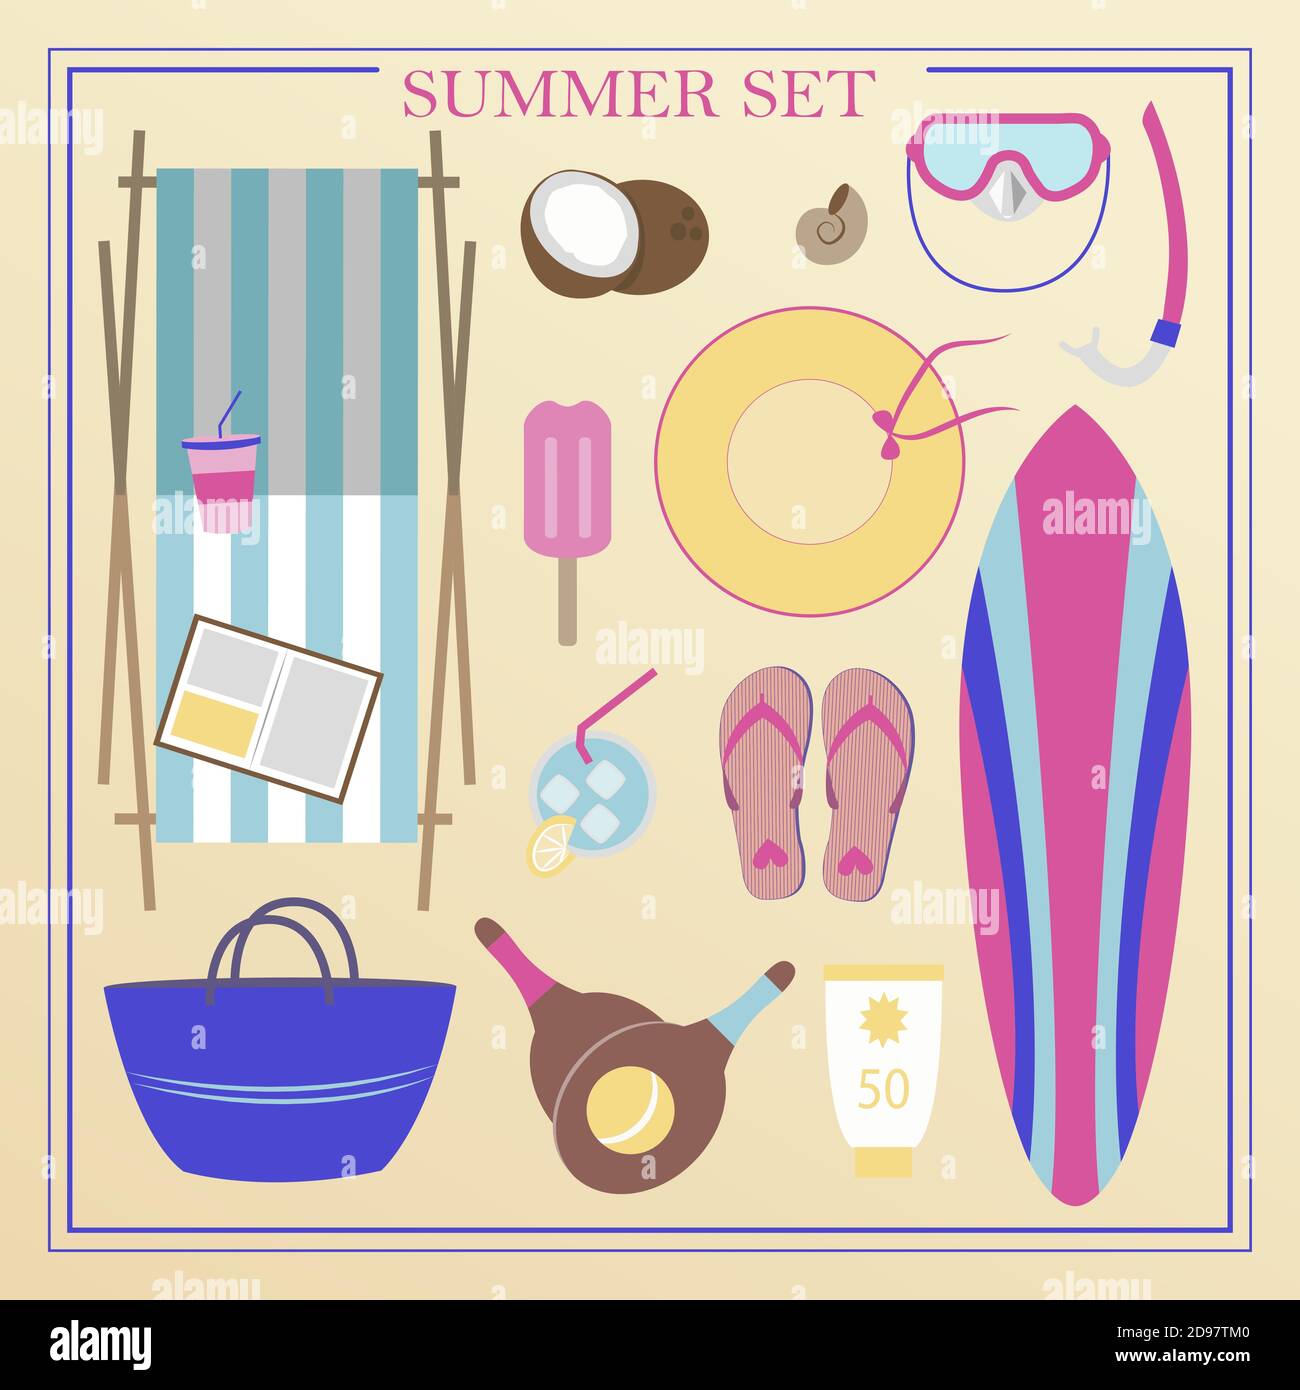 A set of flat beach summer items. Accessories for beach holidays by the sea. Swimsuit, diving cylinders, sunbed, camera and other icons for creating summer posters. Illustrations for ads, web, flyers, and banners. Stock Vector